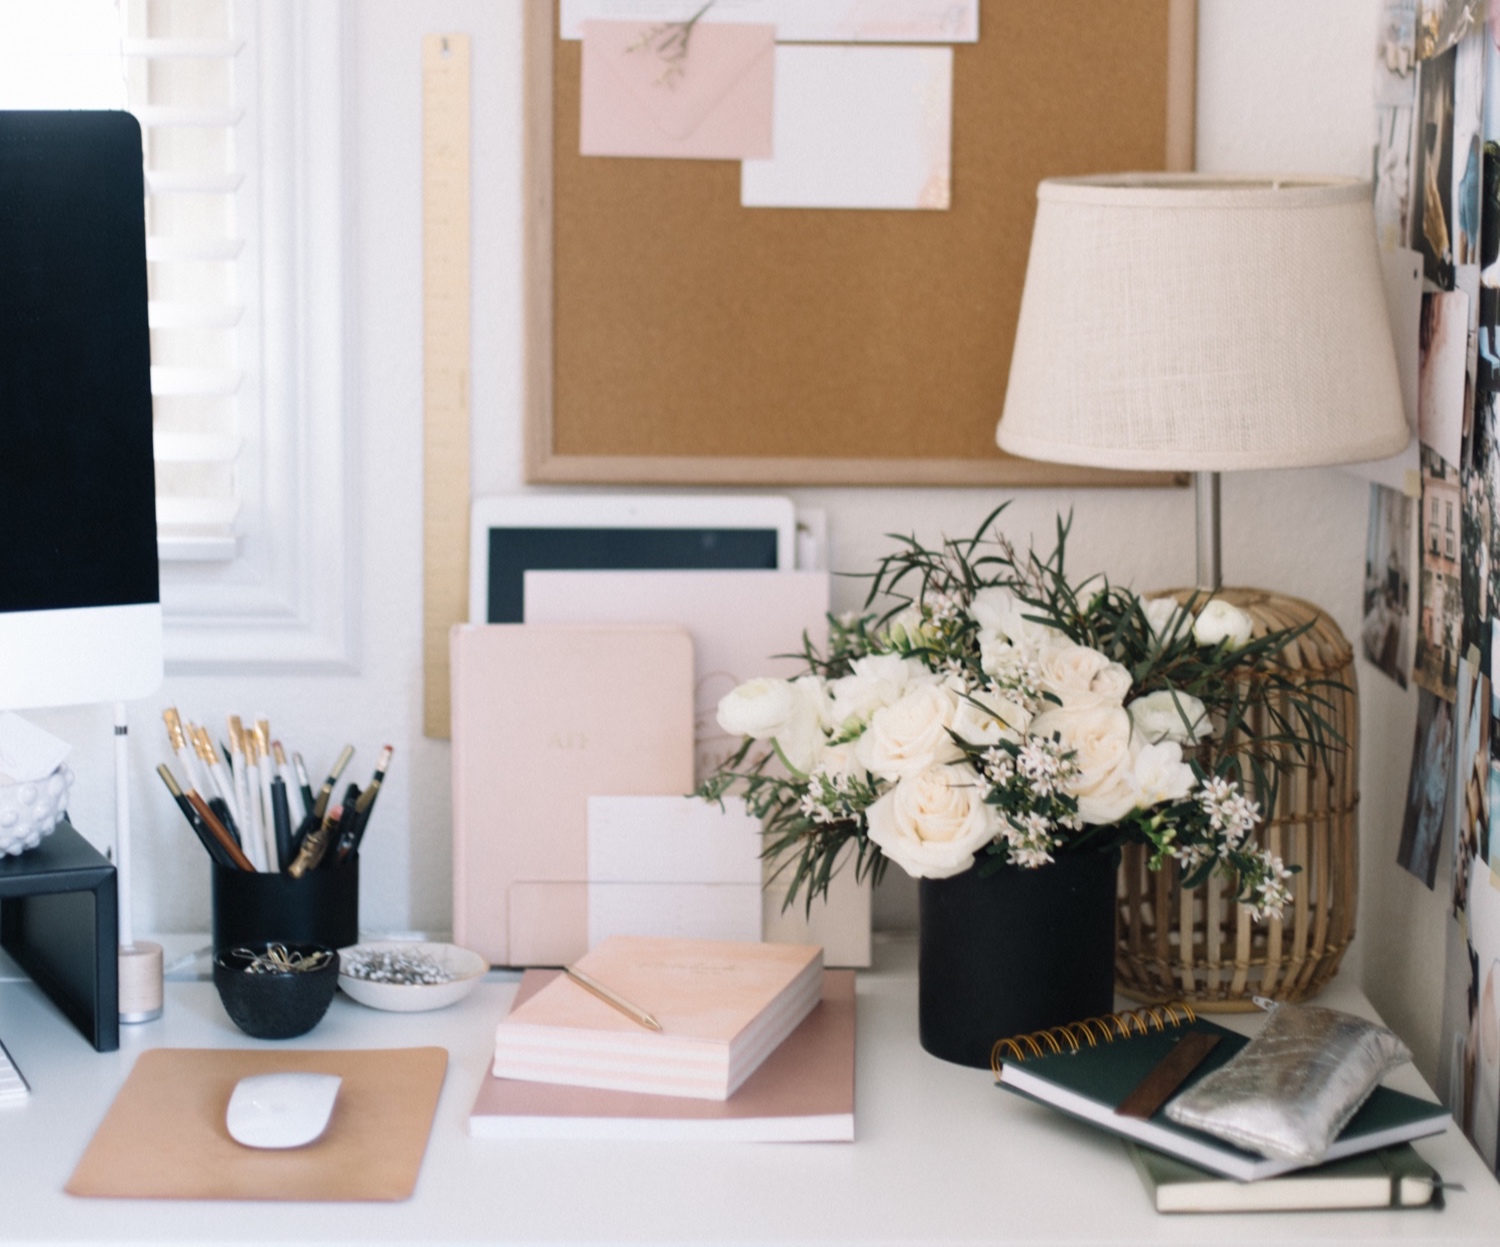 10 Tips For Organizing An Efficient Workspace A Fabulous Fete